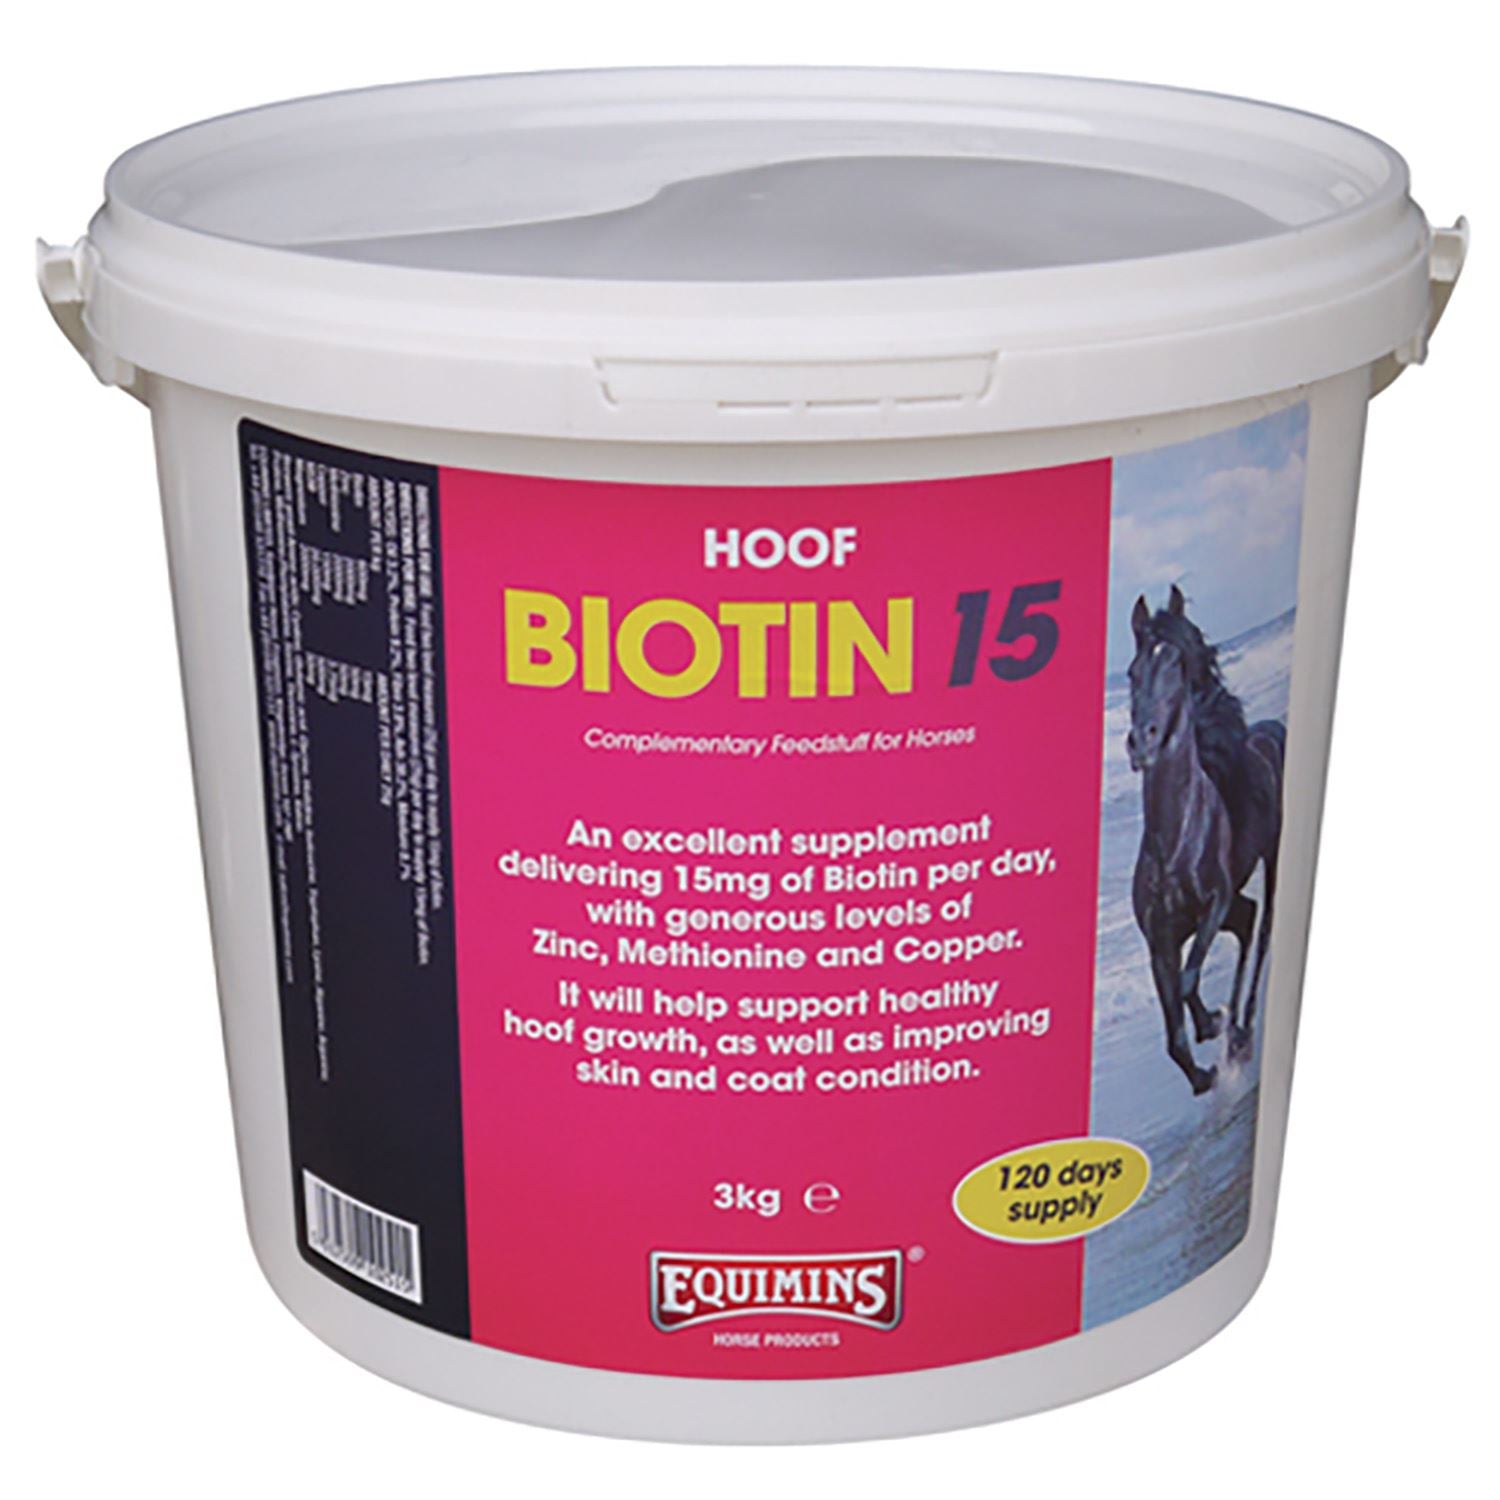 EQUIMINS BIOTIN 15 promotes healthy hoof growth and improves coat and skin condition.